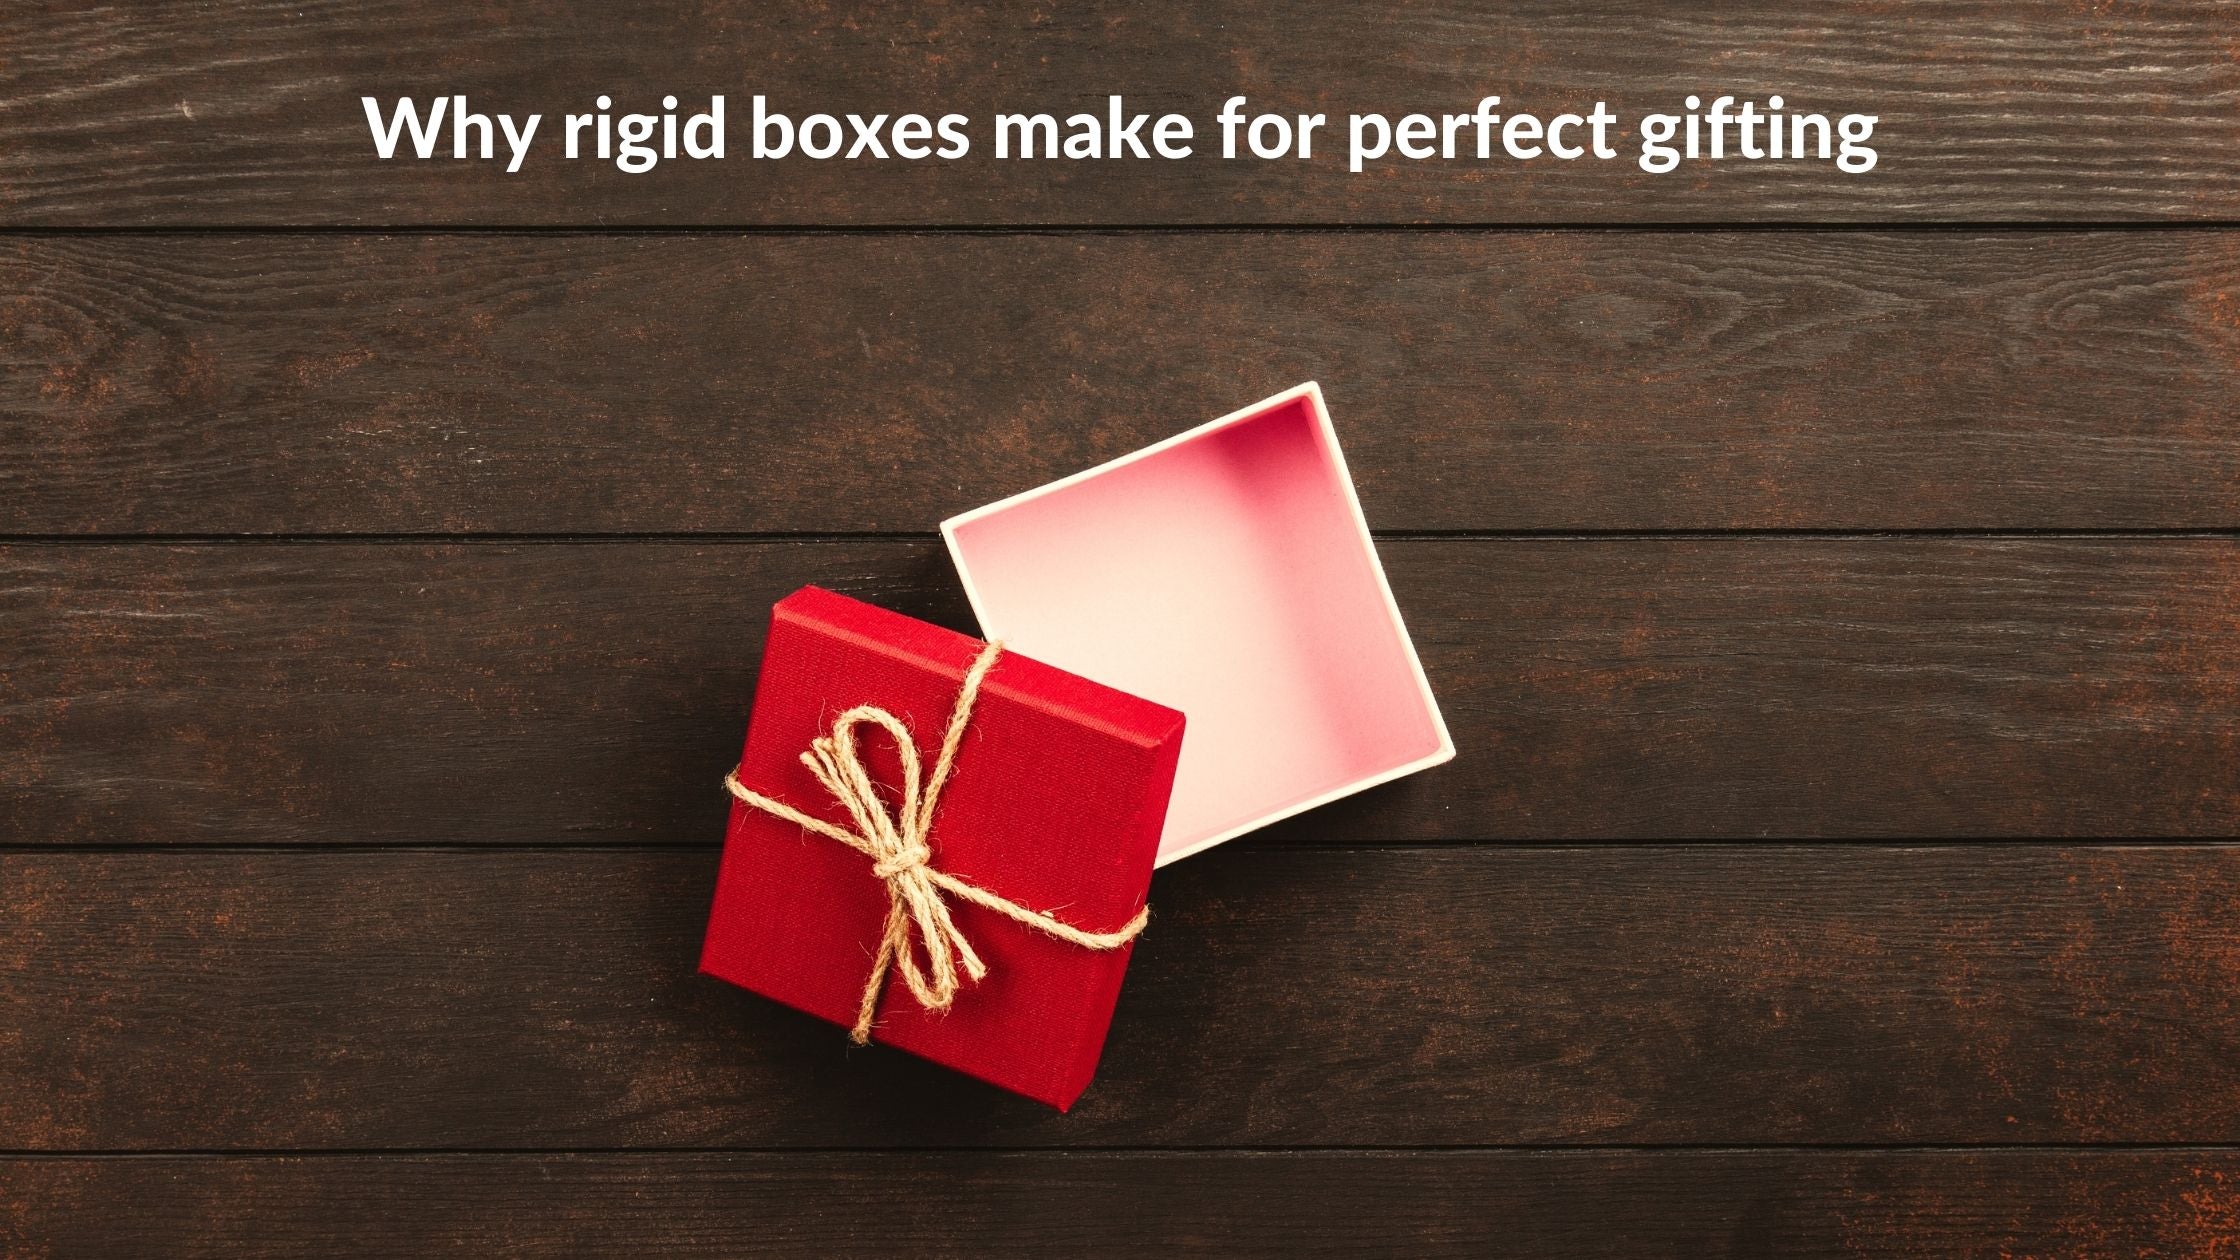 Why rigid boxes make for perfect gifting?